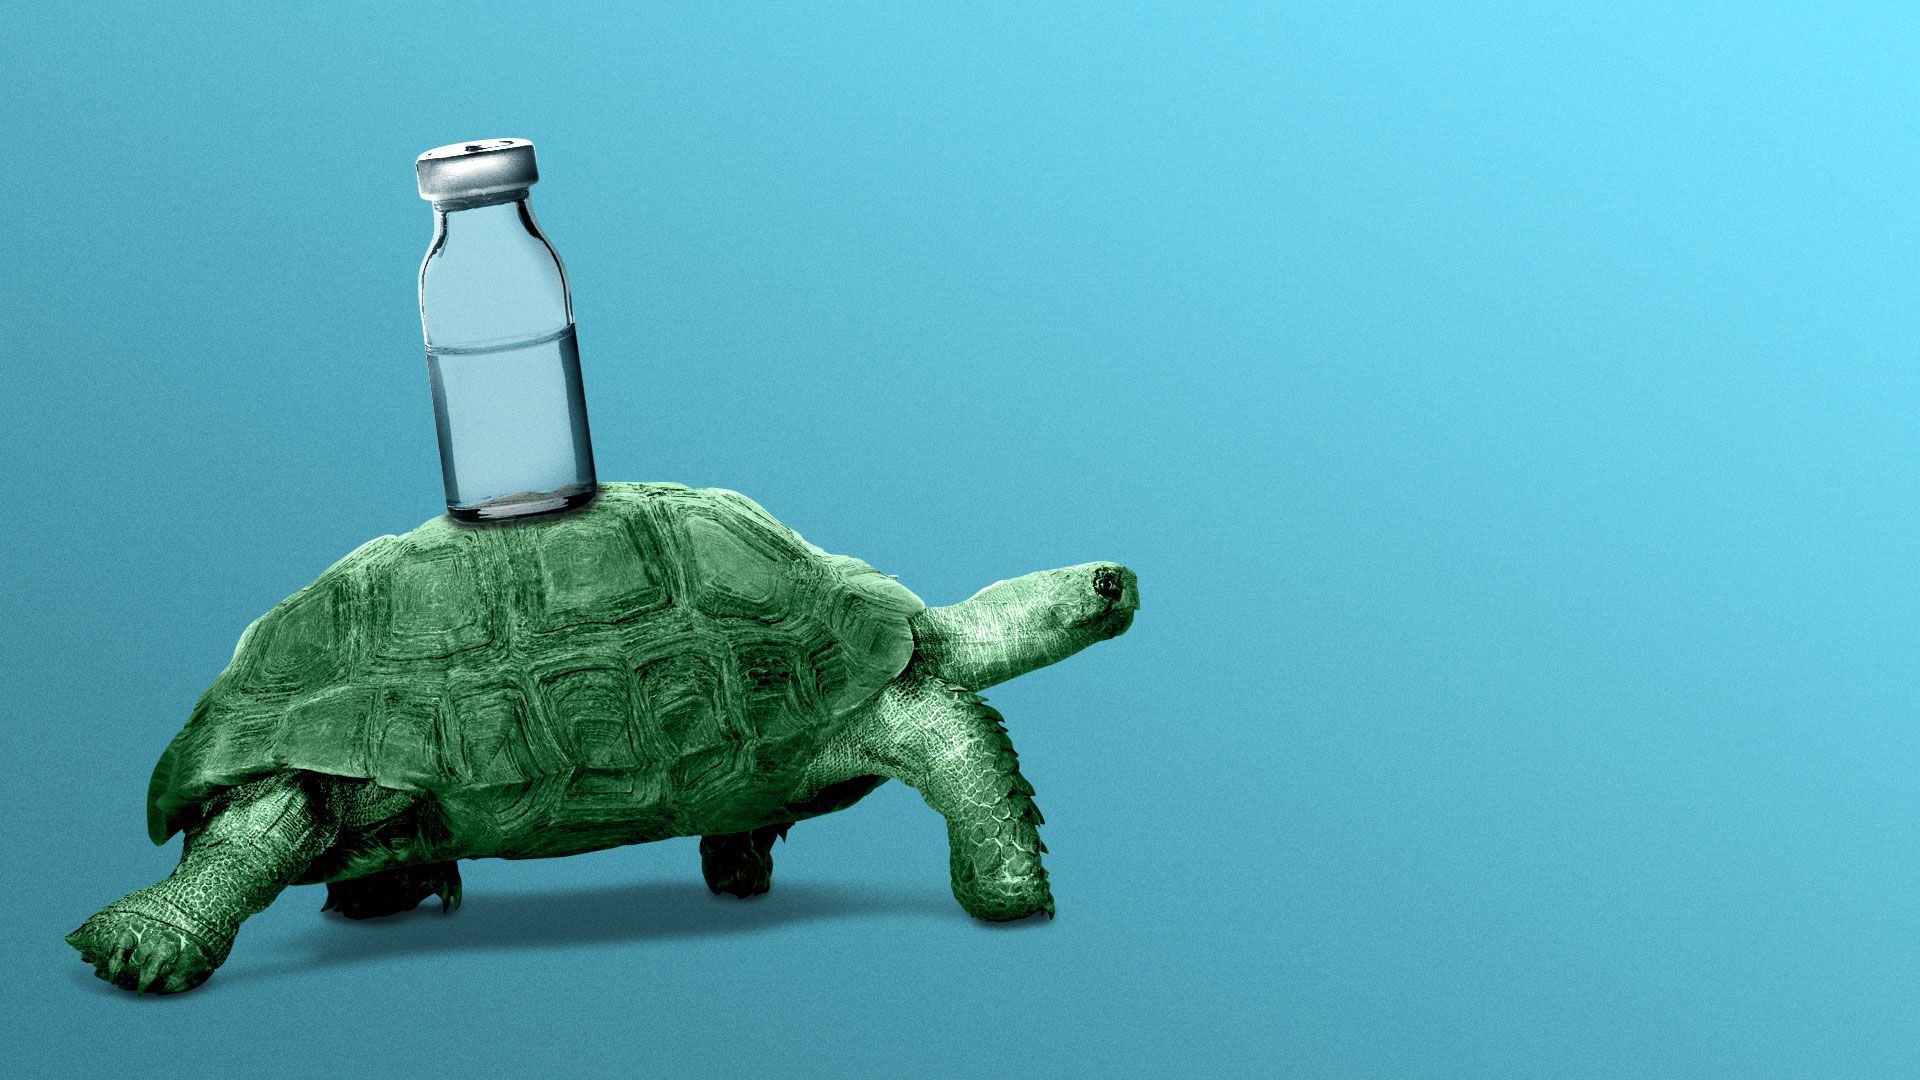 Illustration of a turtle carrying a vial of liquid